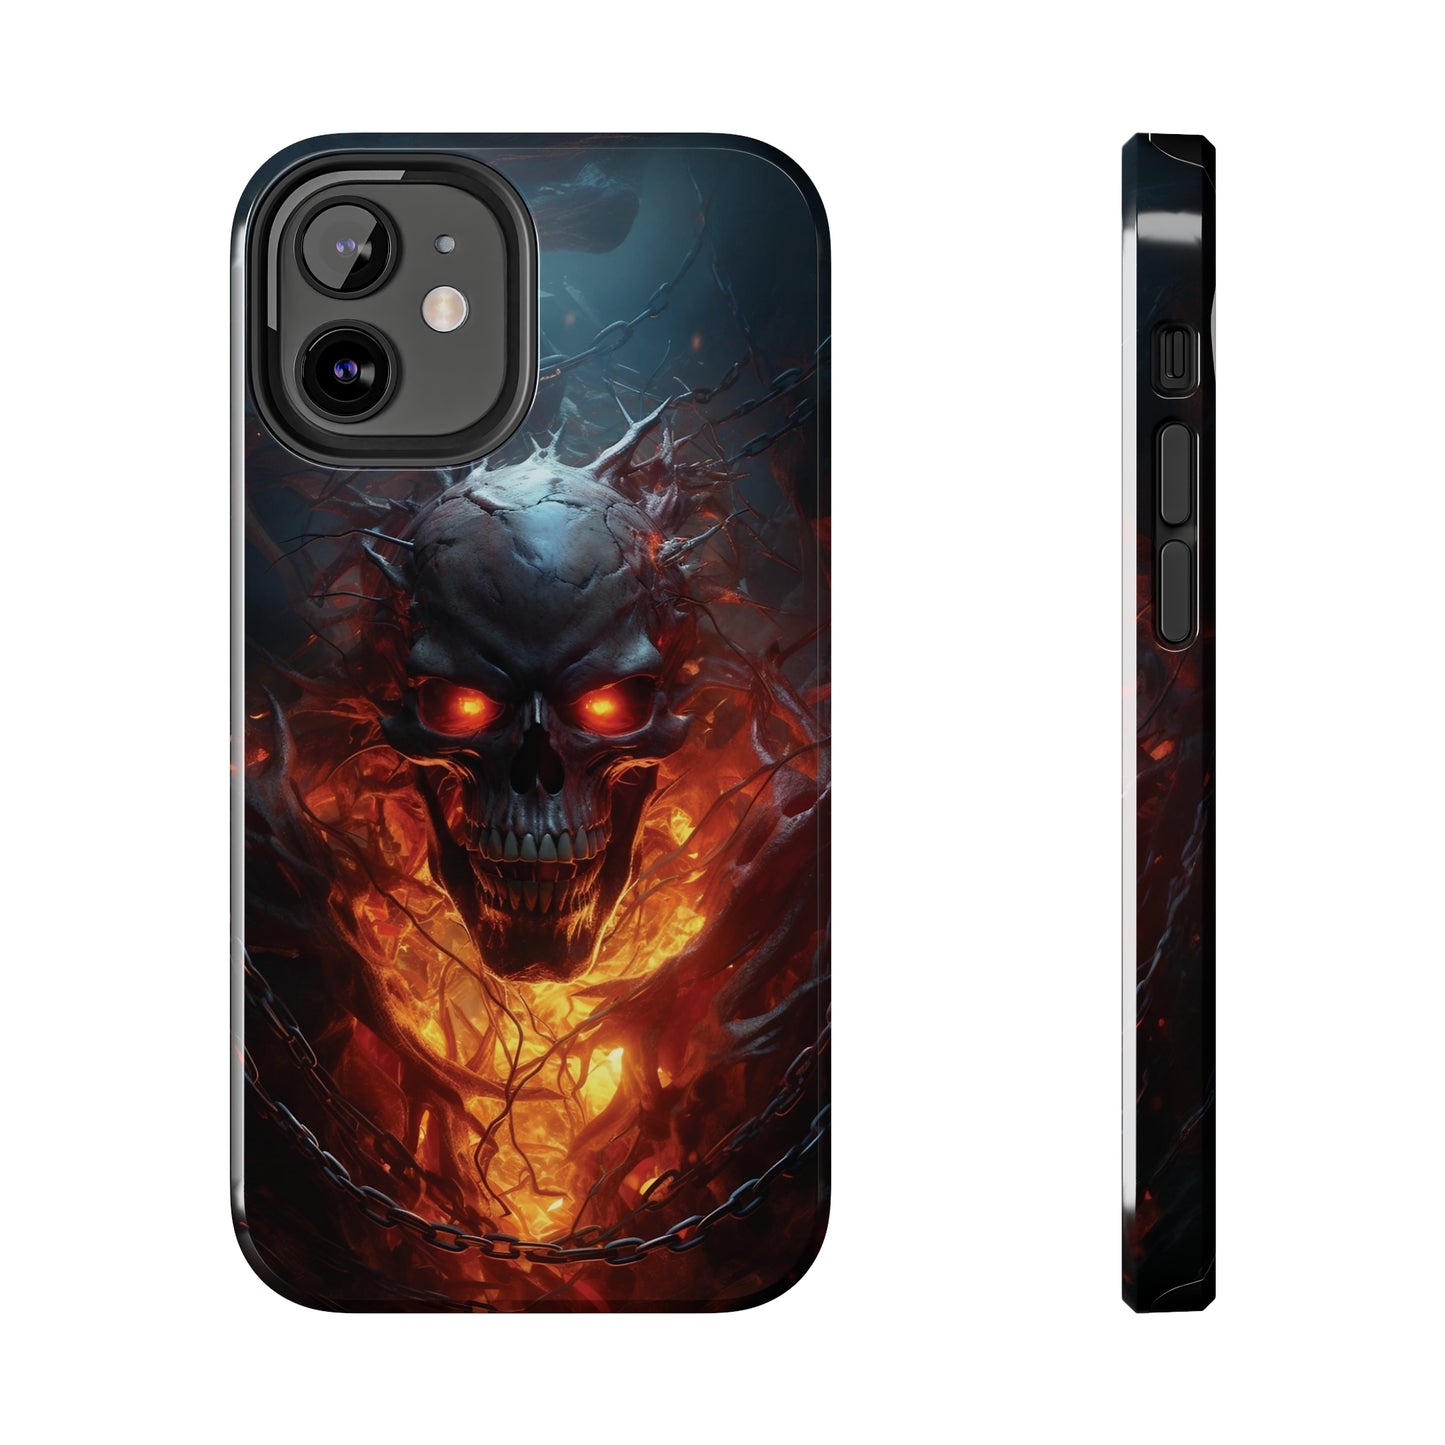 Fiery Skull iPhone Case, Flame Gothic Art Phone Cover, Unique Horror Style iPhone Accessory, Cool Tech Design for iPhone Models, Durable Phone Accessory Protective Cover for iPhone Models, Tough iPhone Case